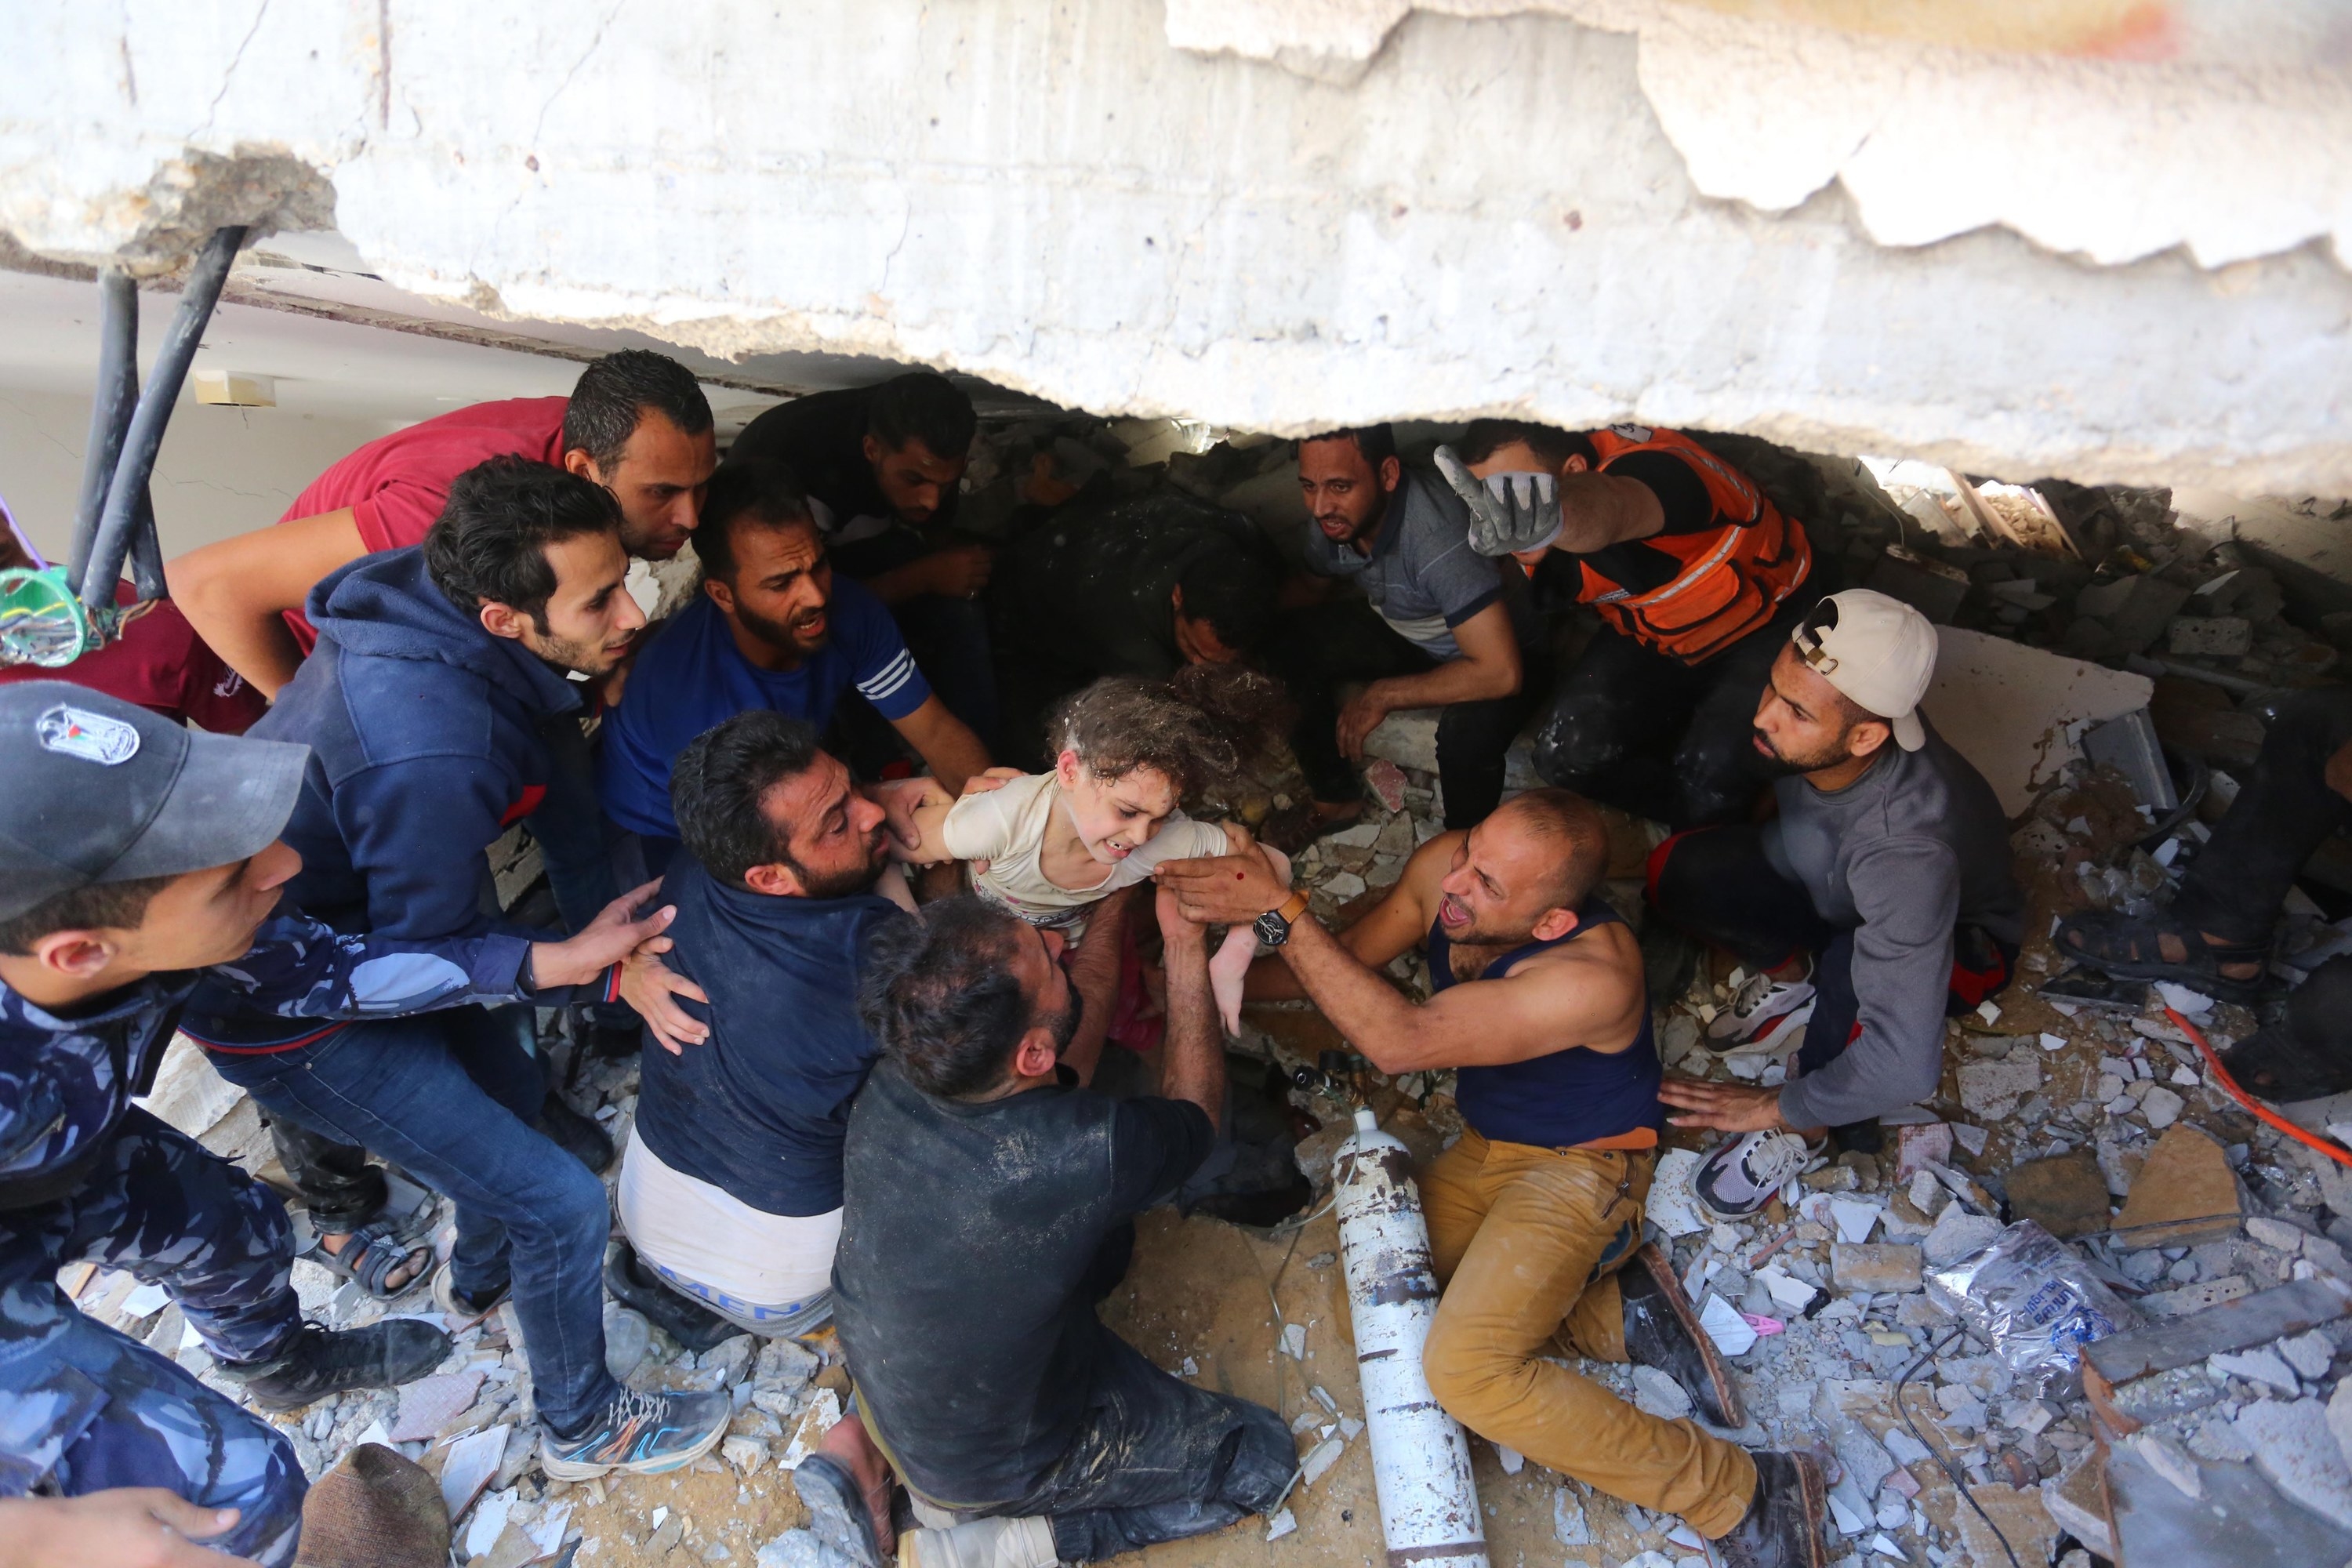 A young girl is pulled out of rubble by a group of men after a bombing in Gaza